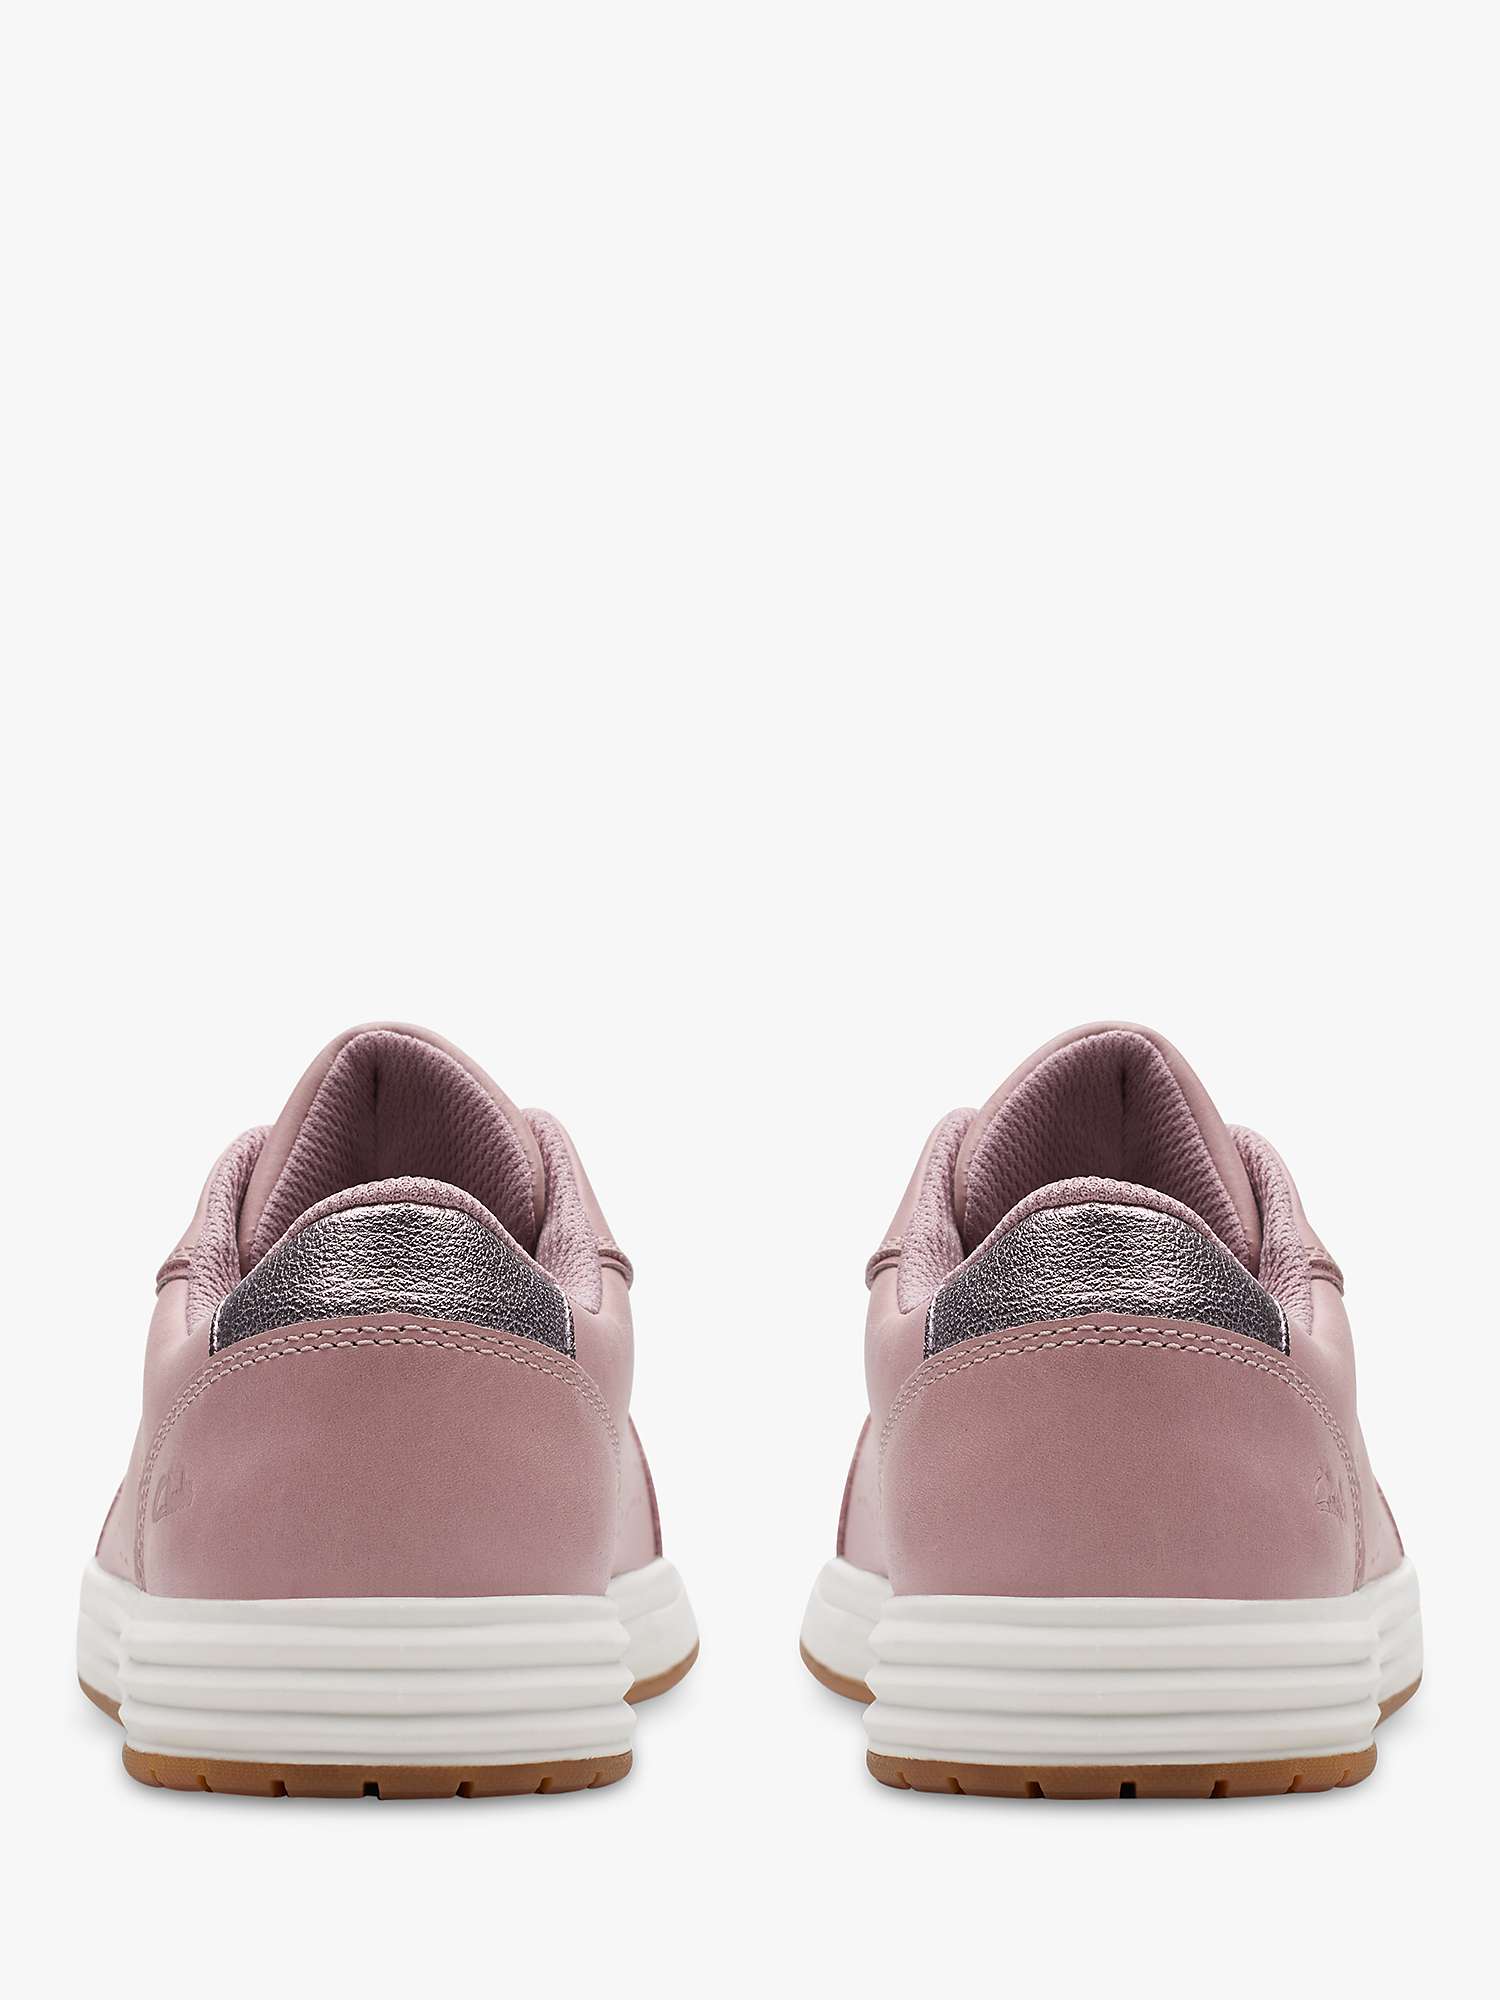 Buy Clarks Kids' Urban Solo Leather Lace Up Trainers Online at johnlewis.com